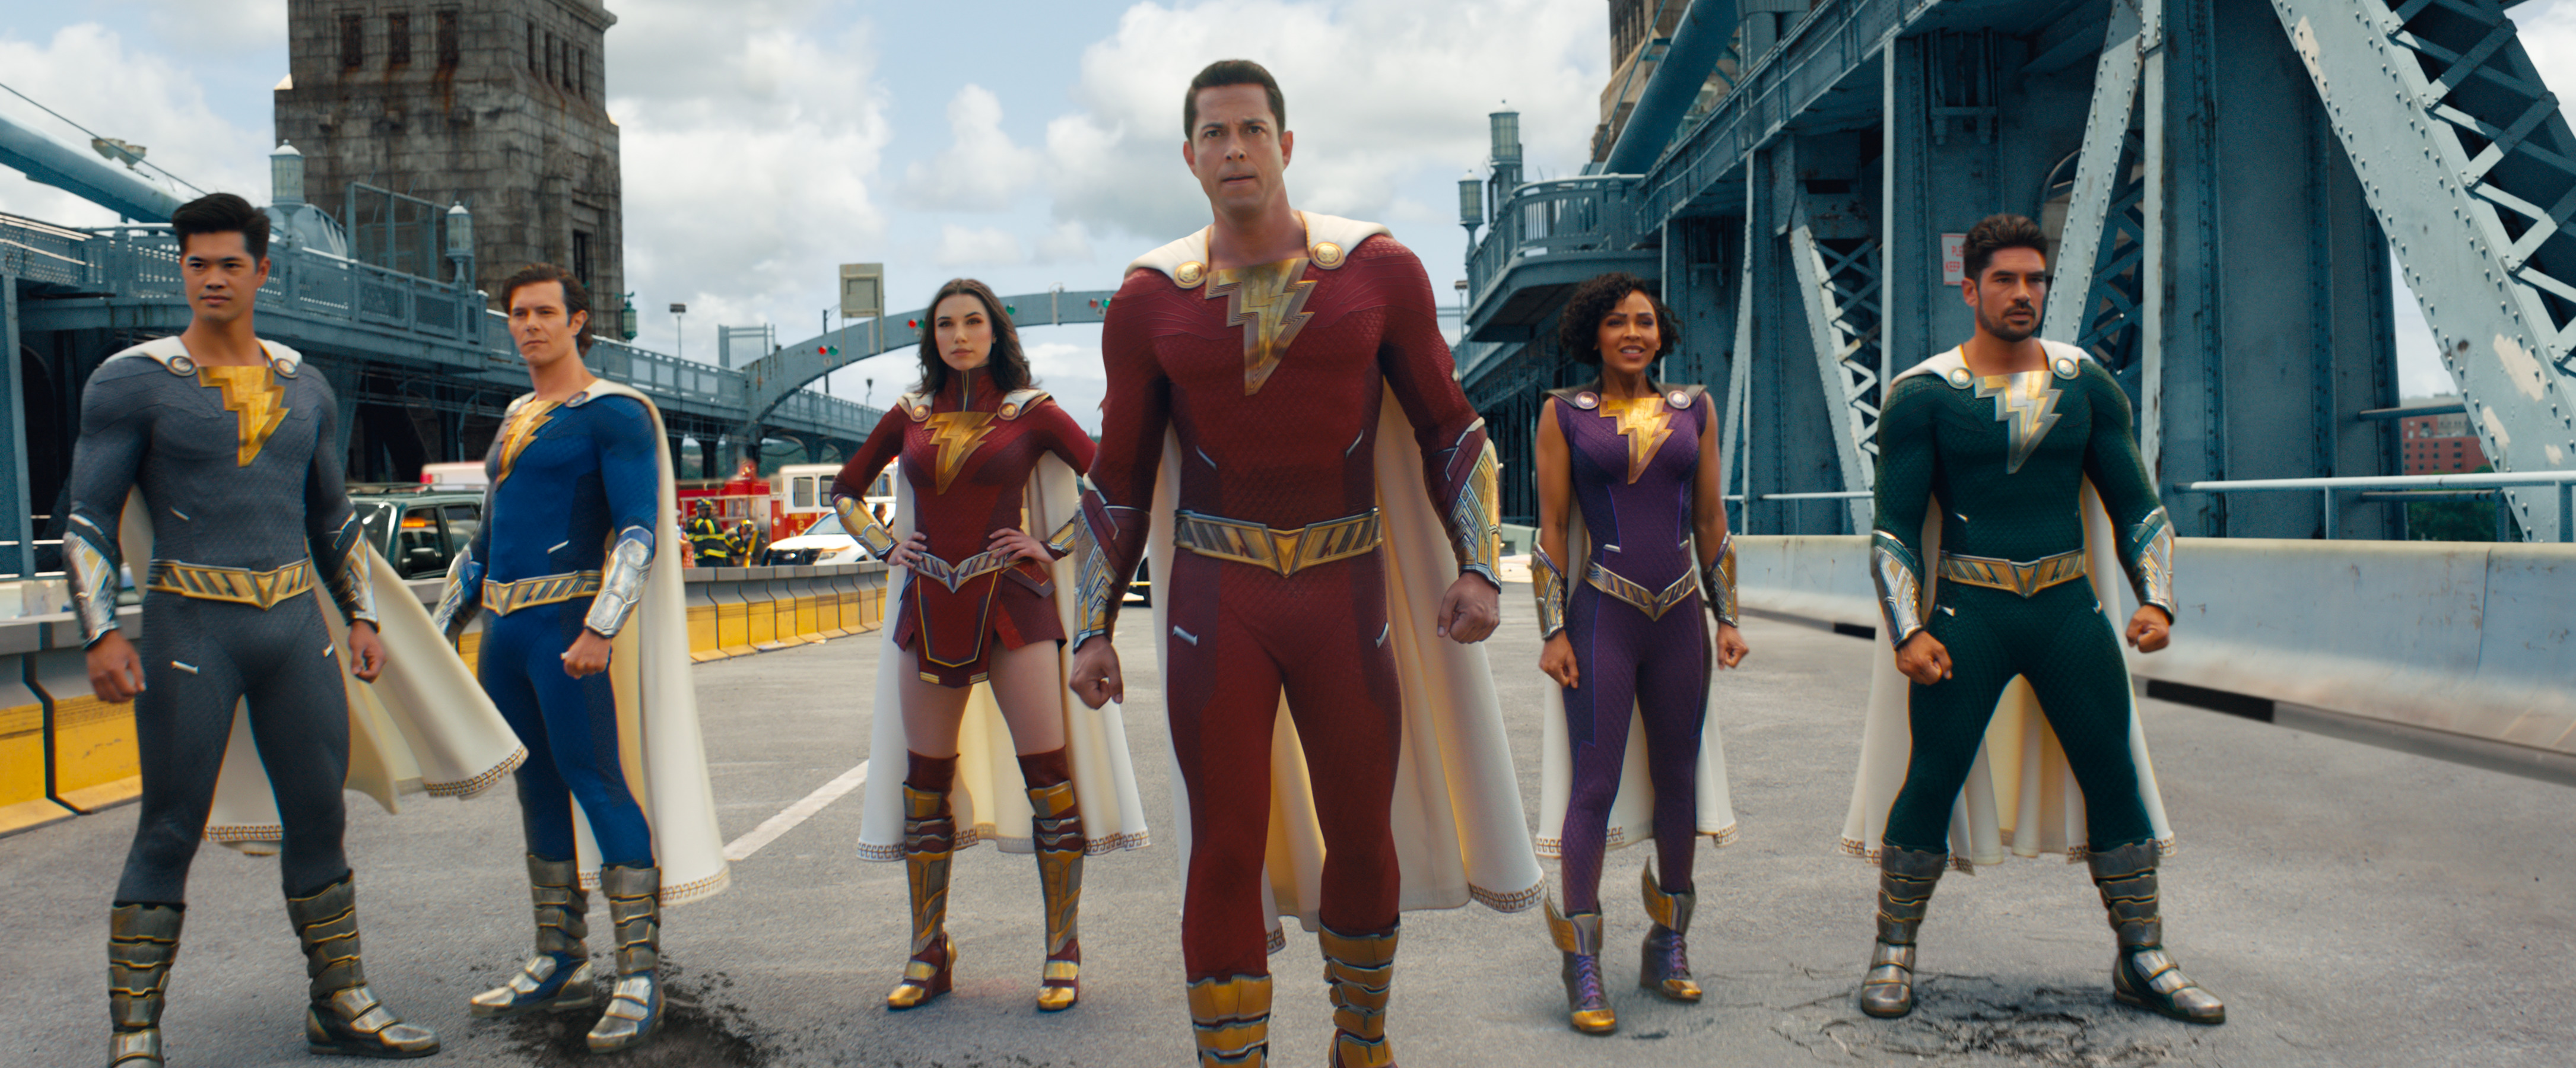 Shazam! Fury of The Gods First Trailer Has Arrived